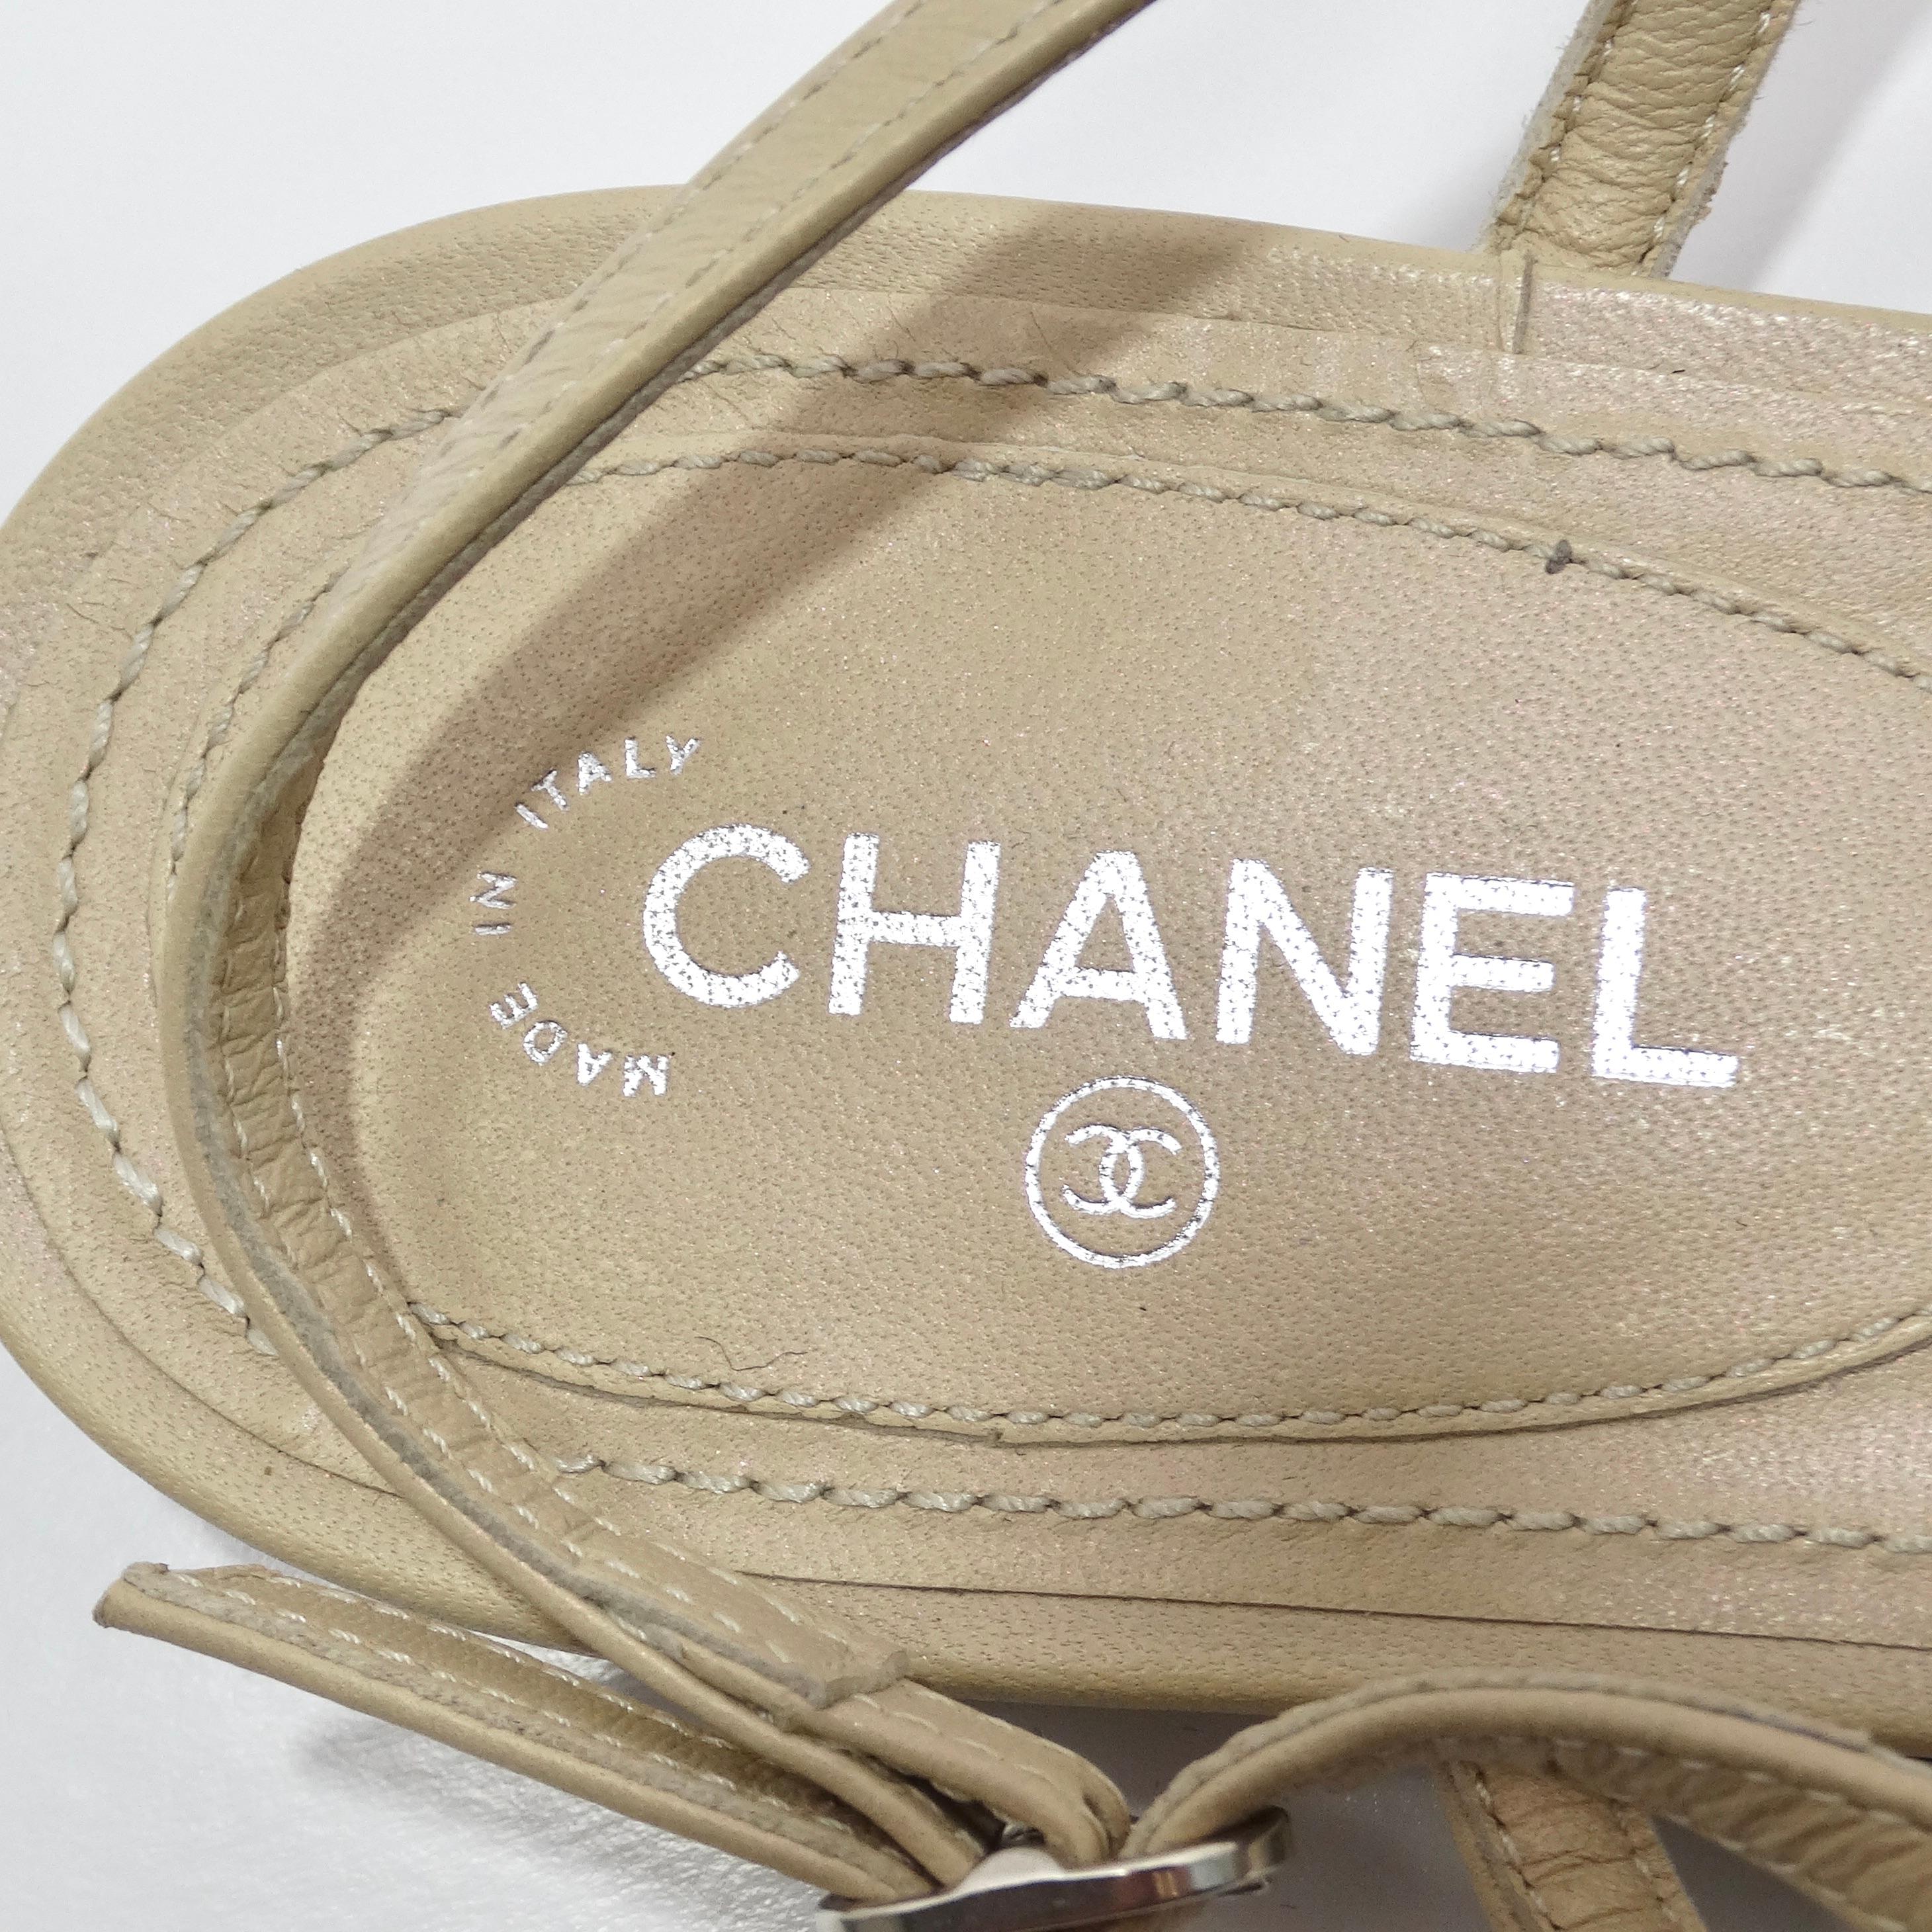 Chanel CC T Strap Leather Sandals In Good Condition For Sale In Scottsdale, AZ